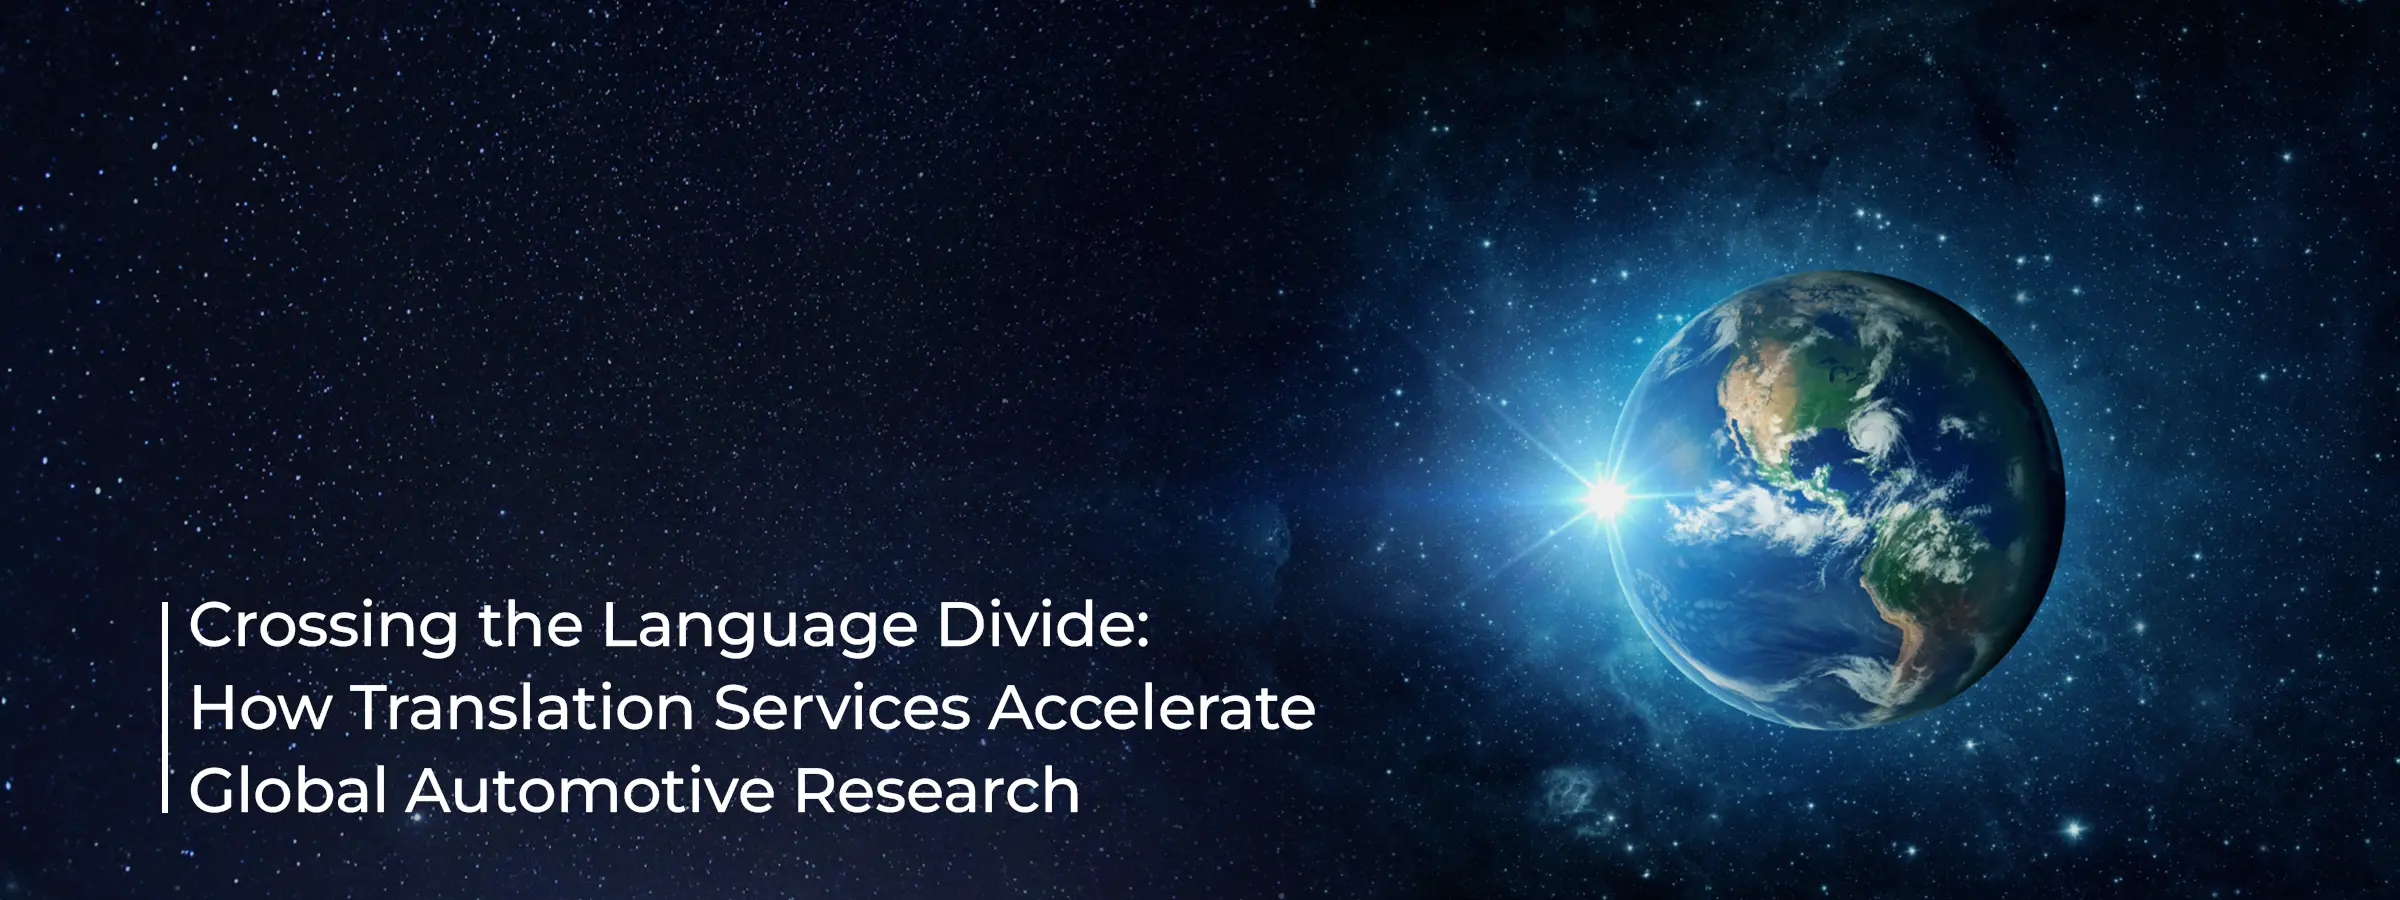 translation-services-accelerate-global-automotive-research